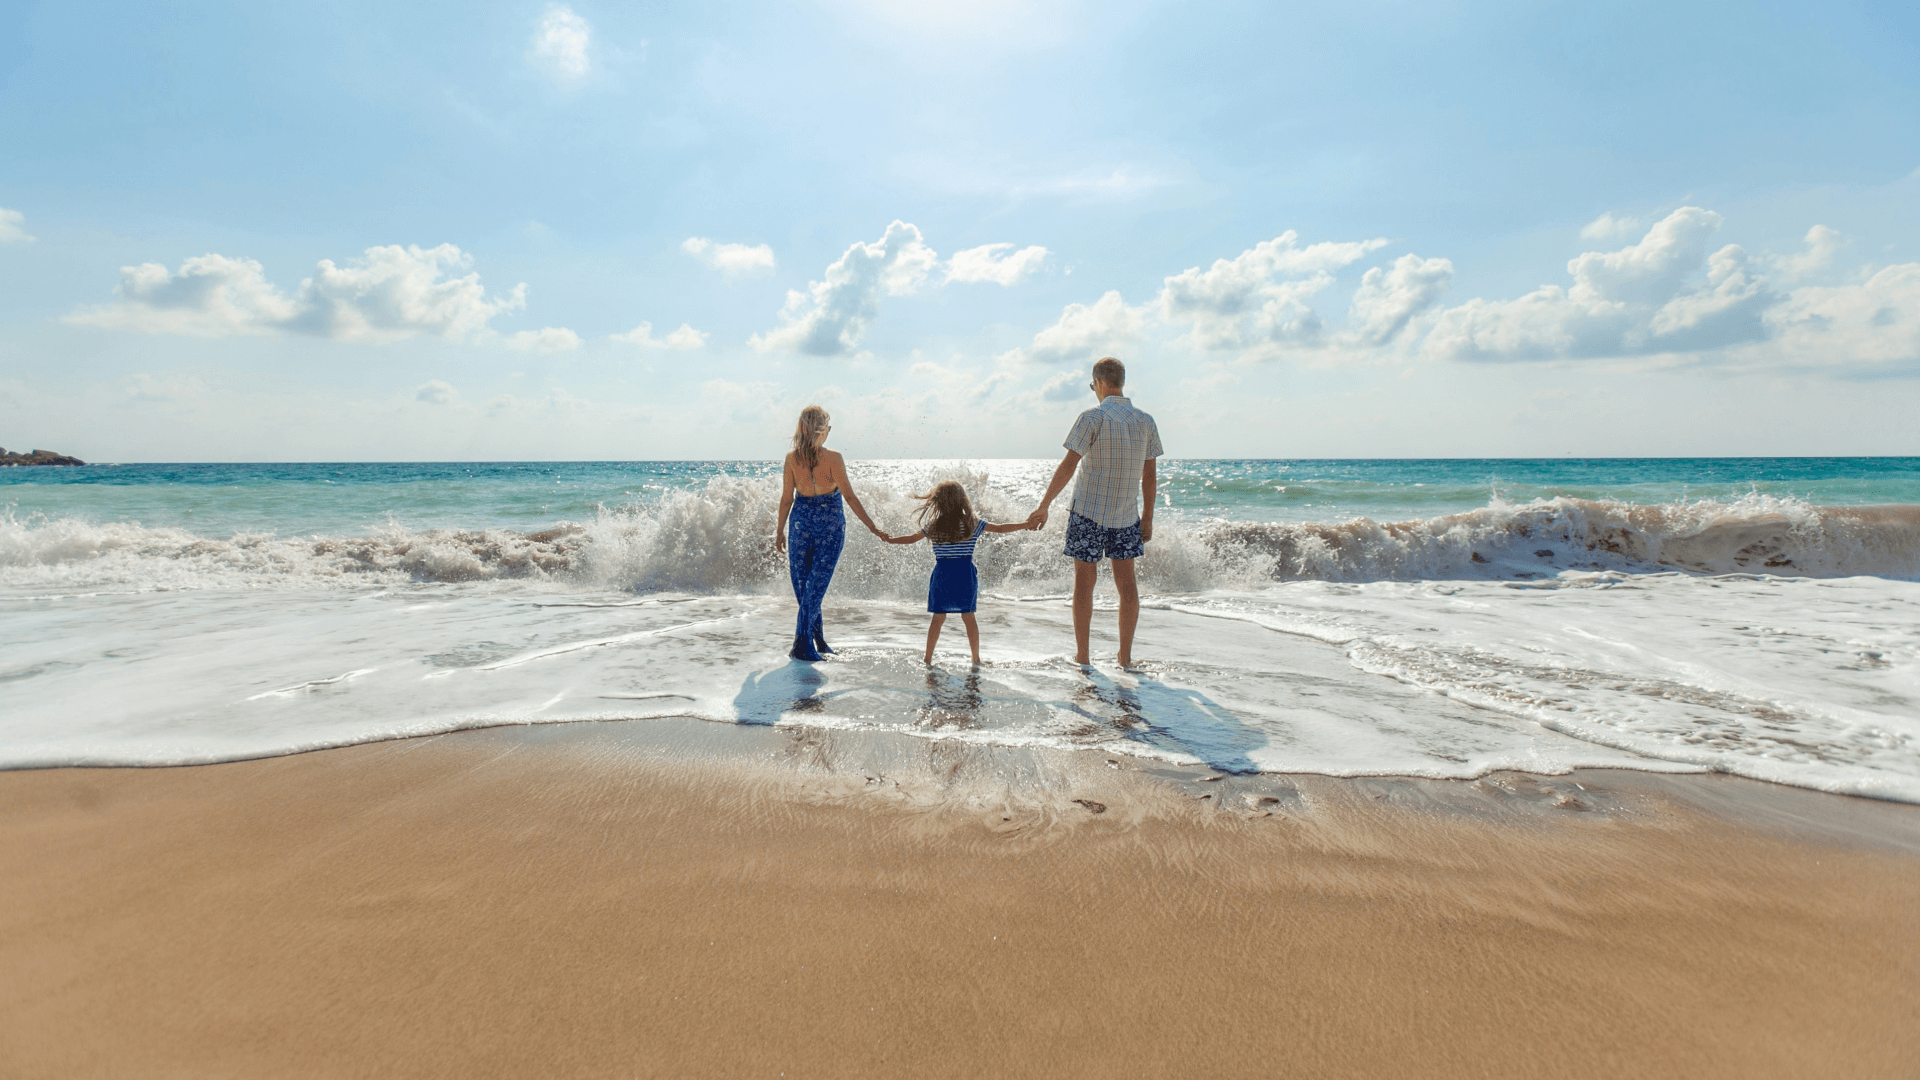 A family of three standing at the edge of the water on a beach